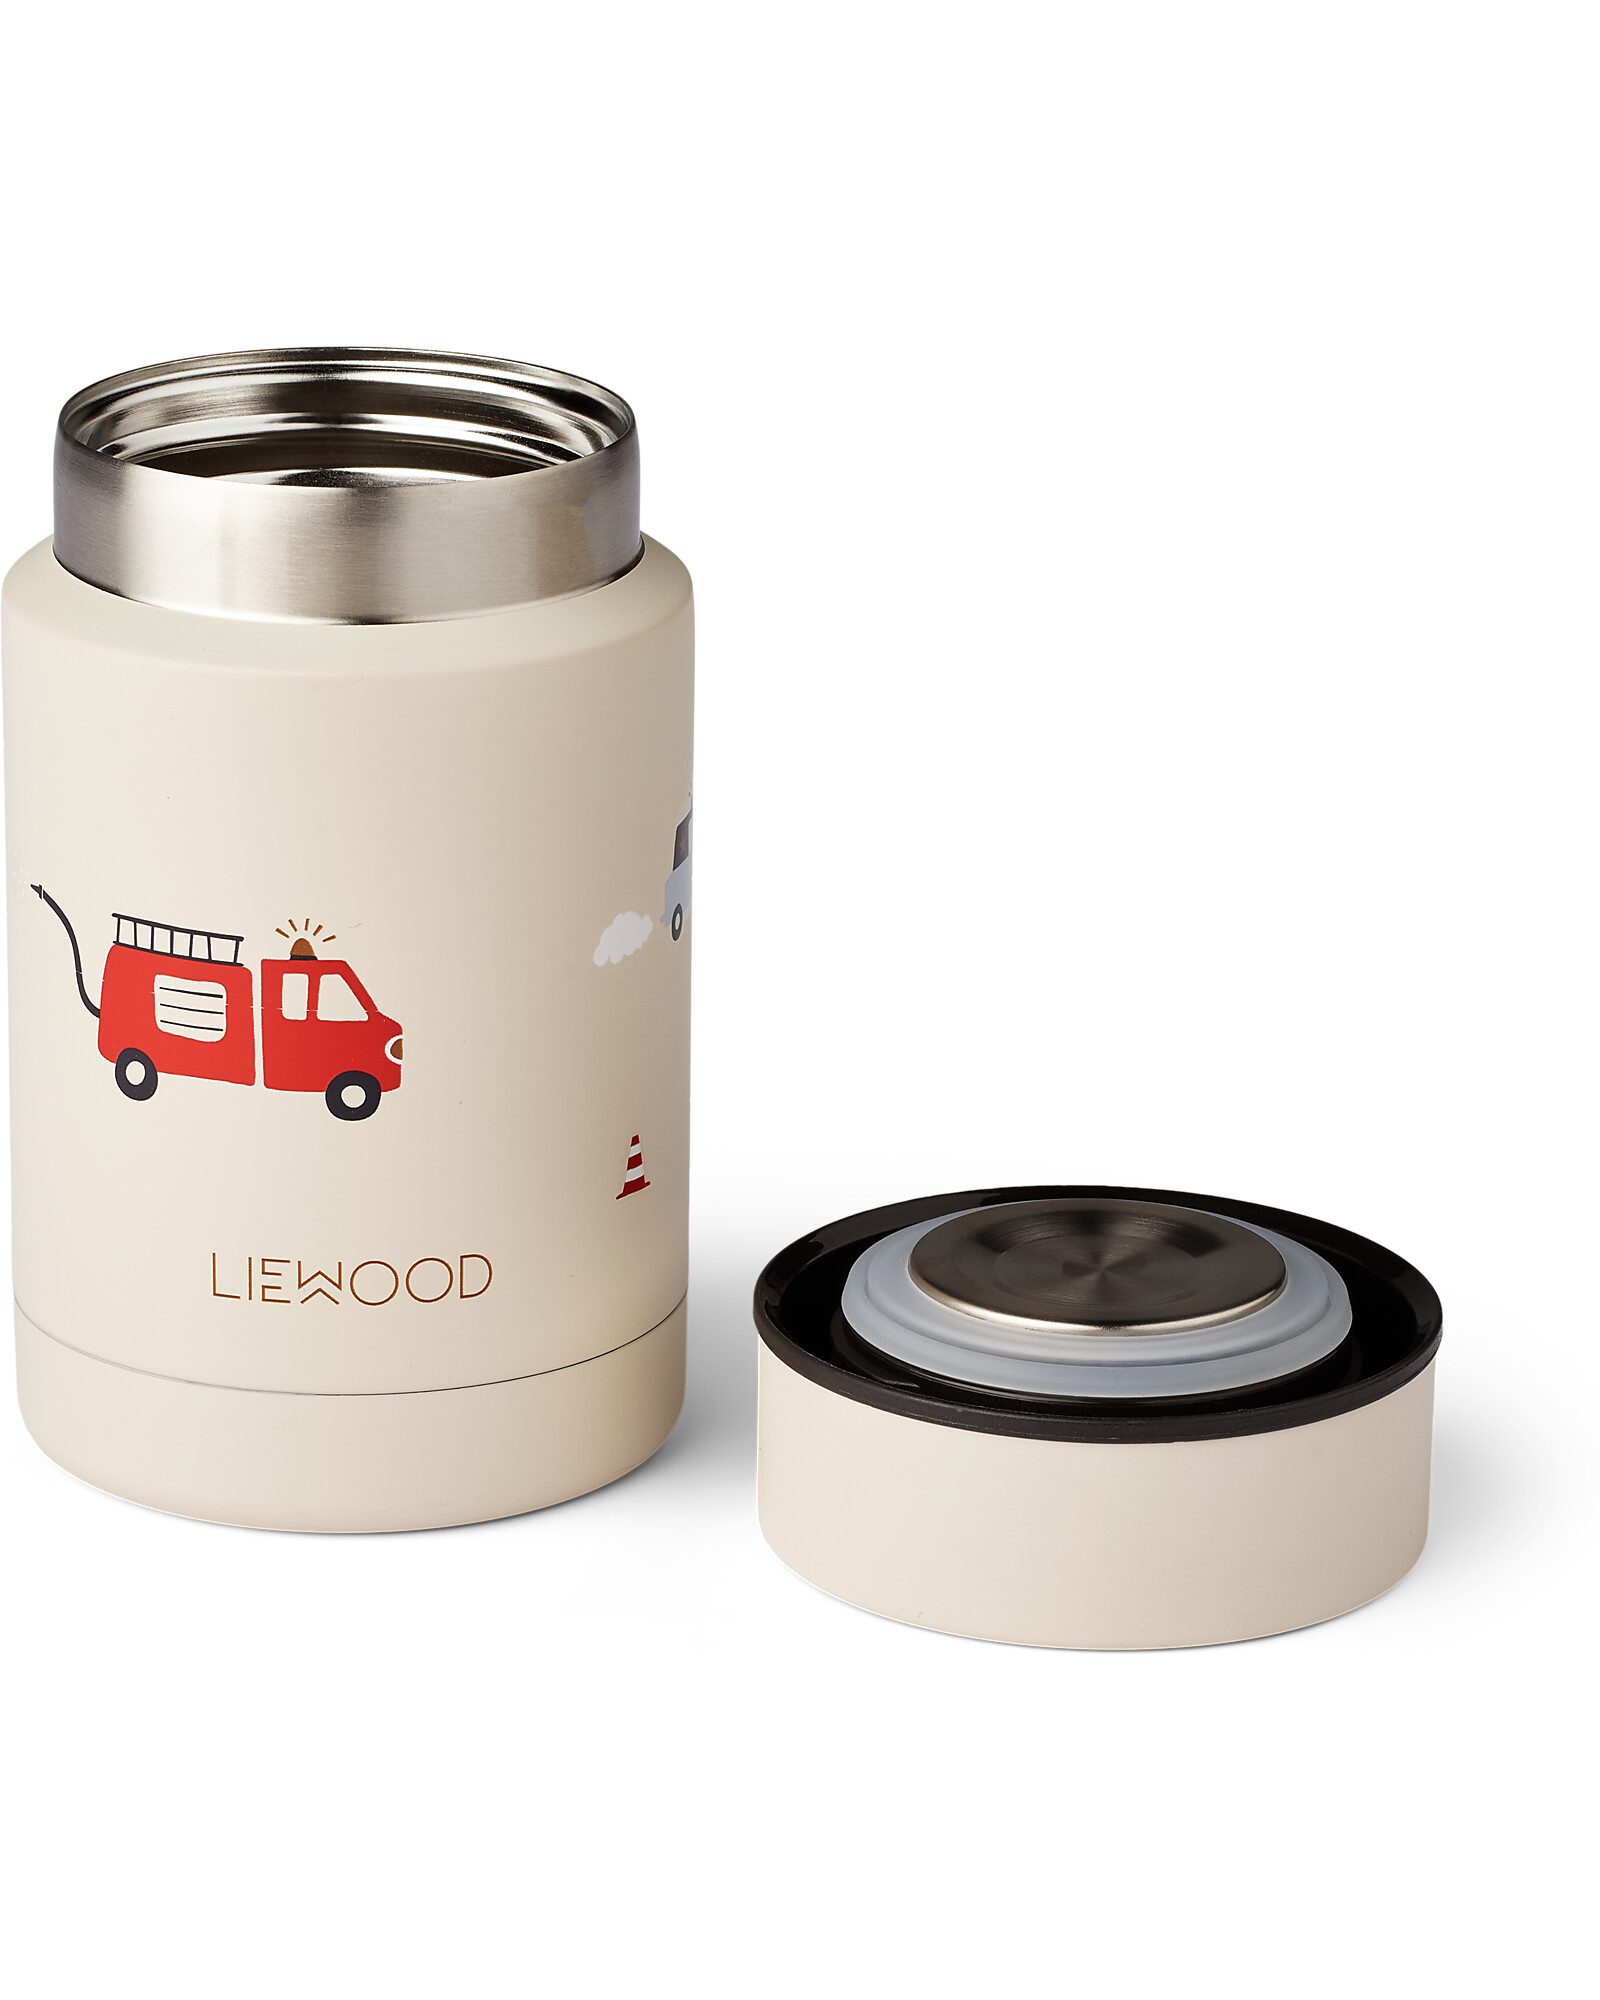 https://data.family-nation.com/imgprodotto/liewood-stainless-steel-thermos-food-jar-nadja-emergency-vehicles-sandy-250-ml-thermal-containers_494769_zoom.jpg